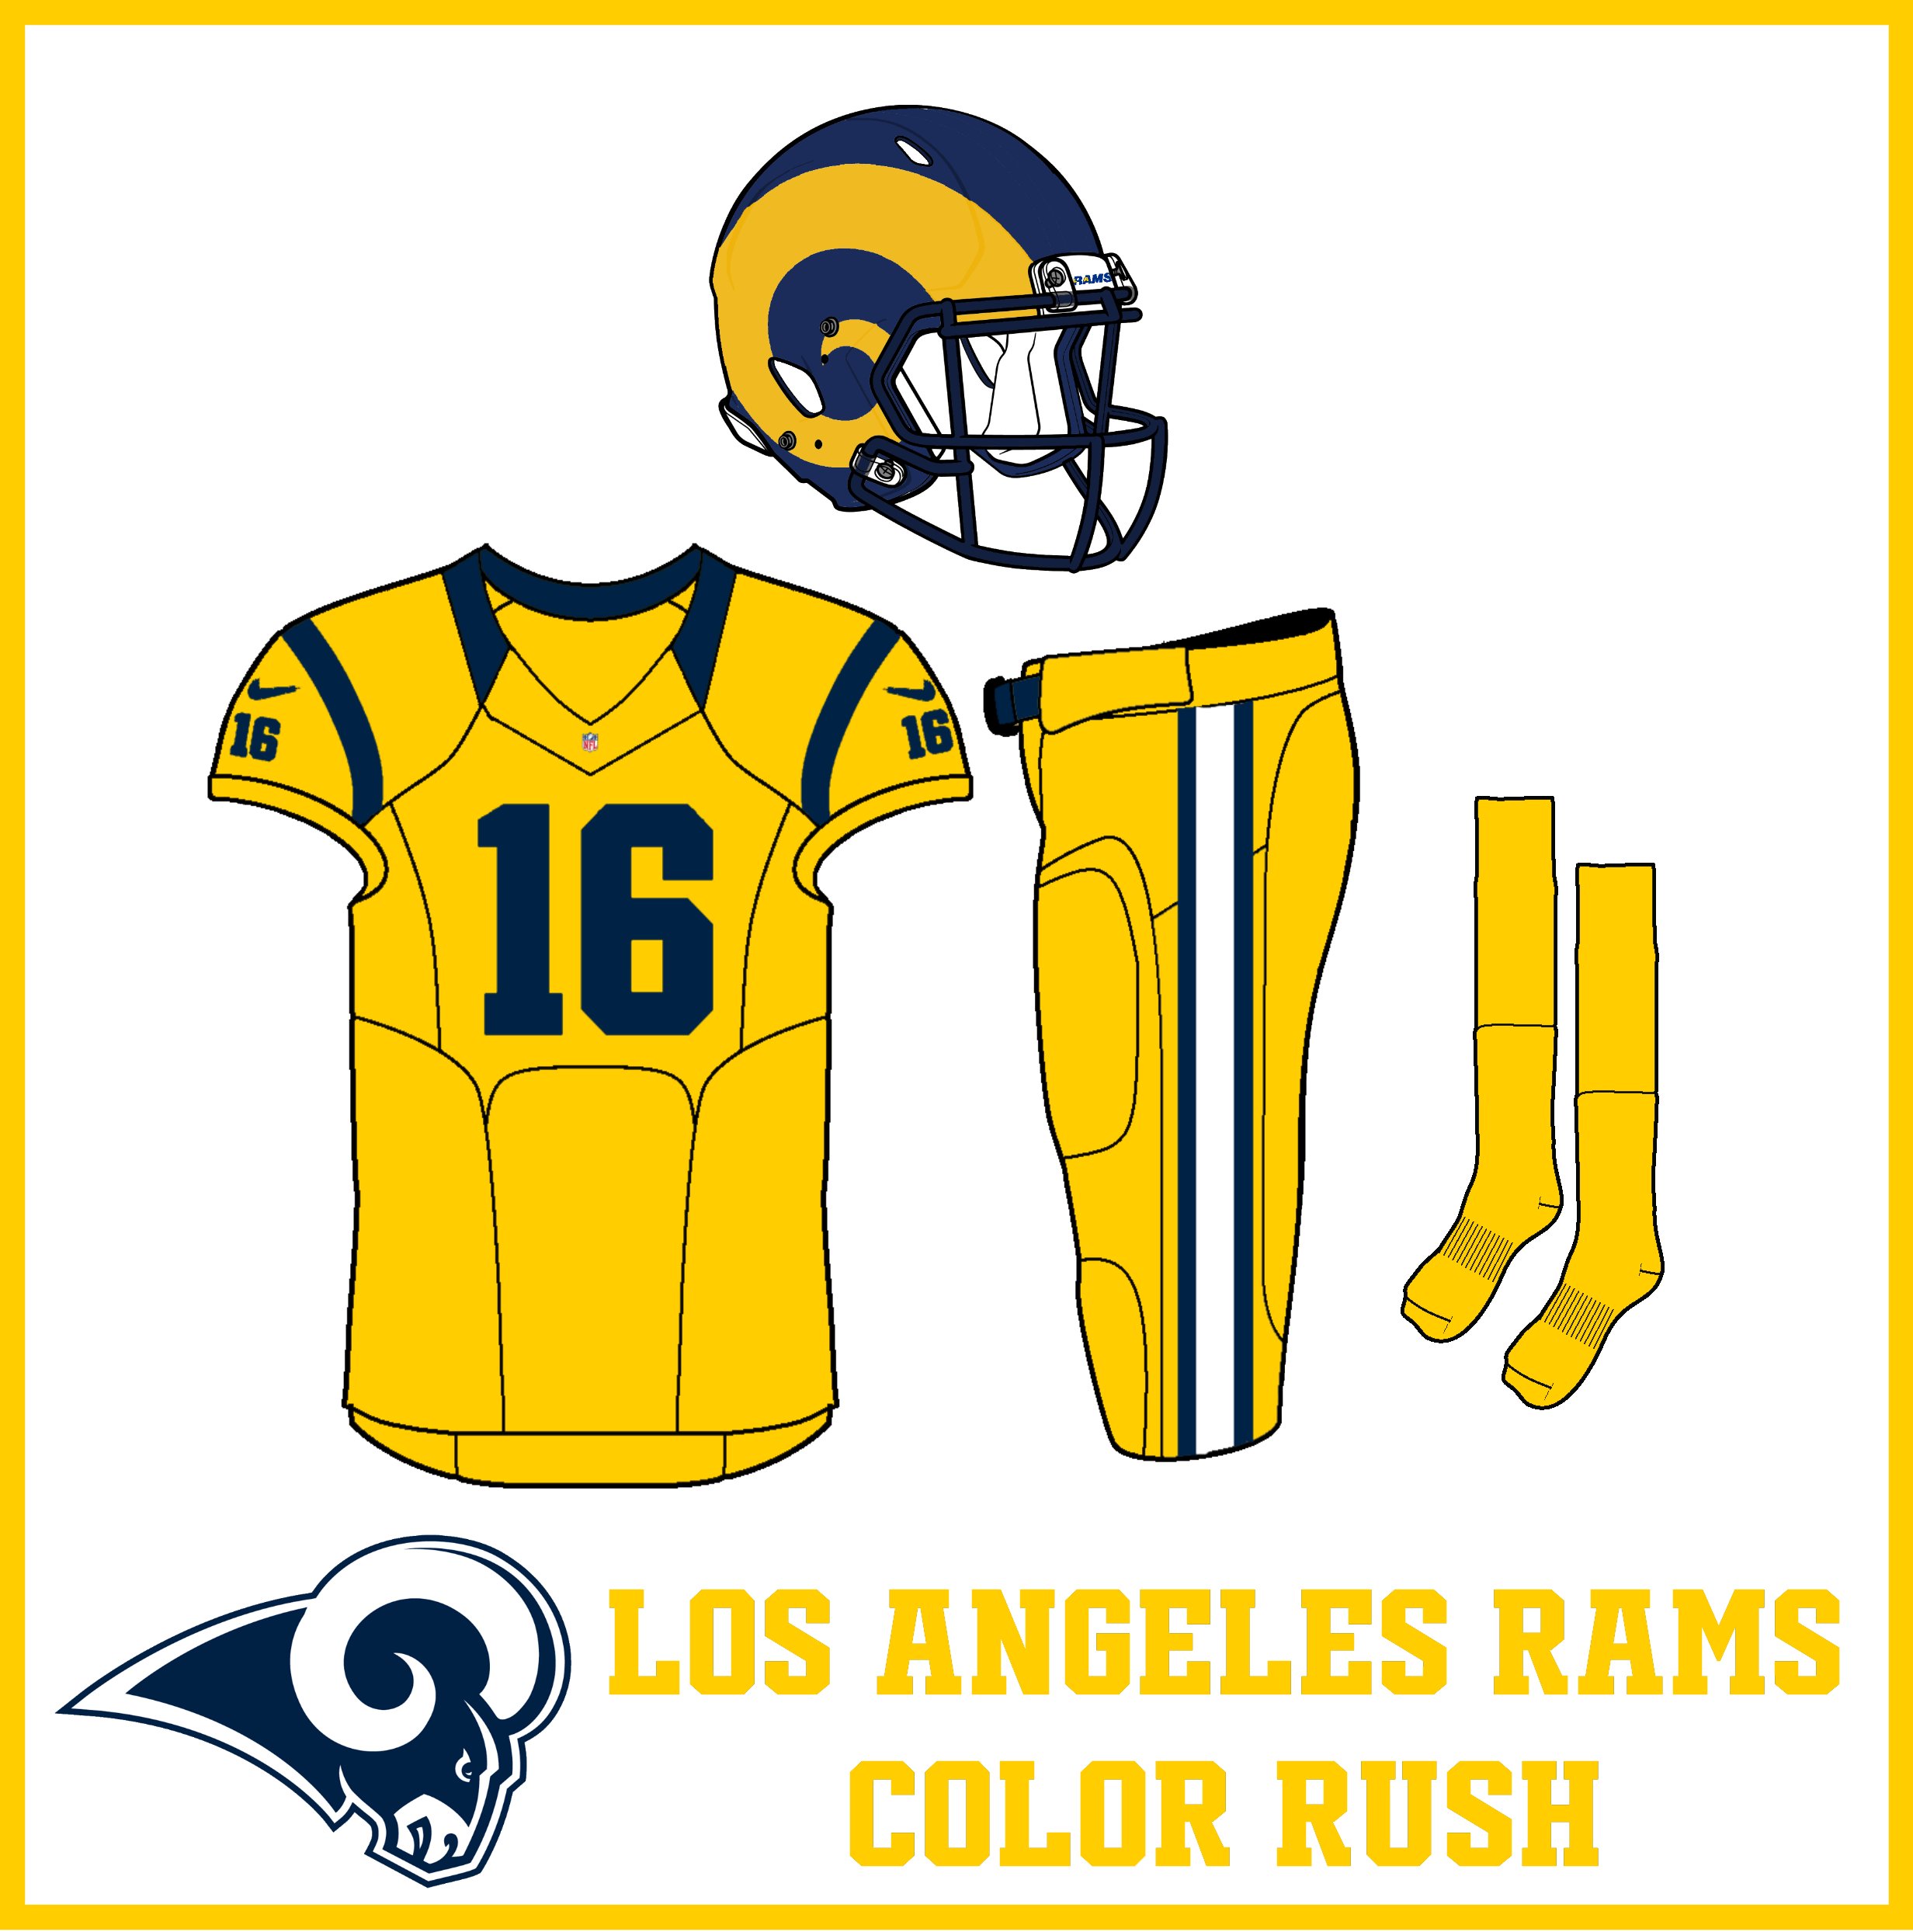 NFL Week 3 2017: What do Color Rush uniforms look like?